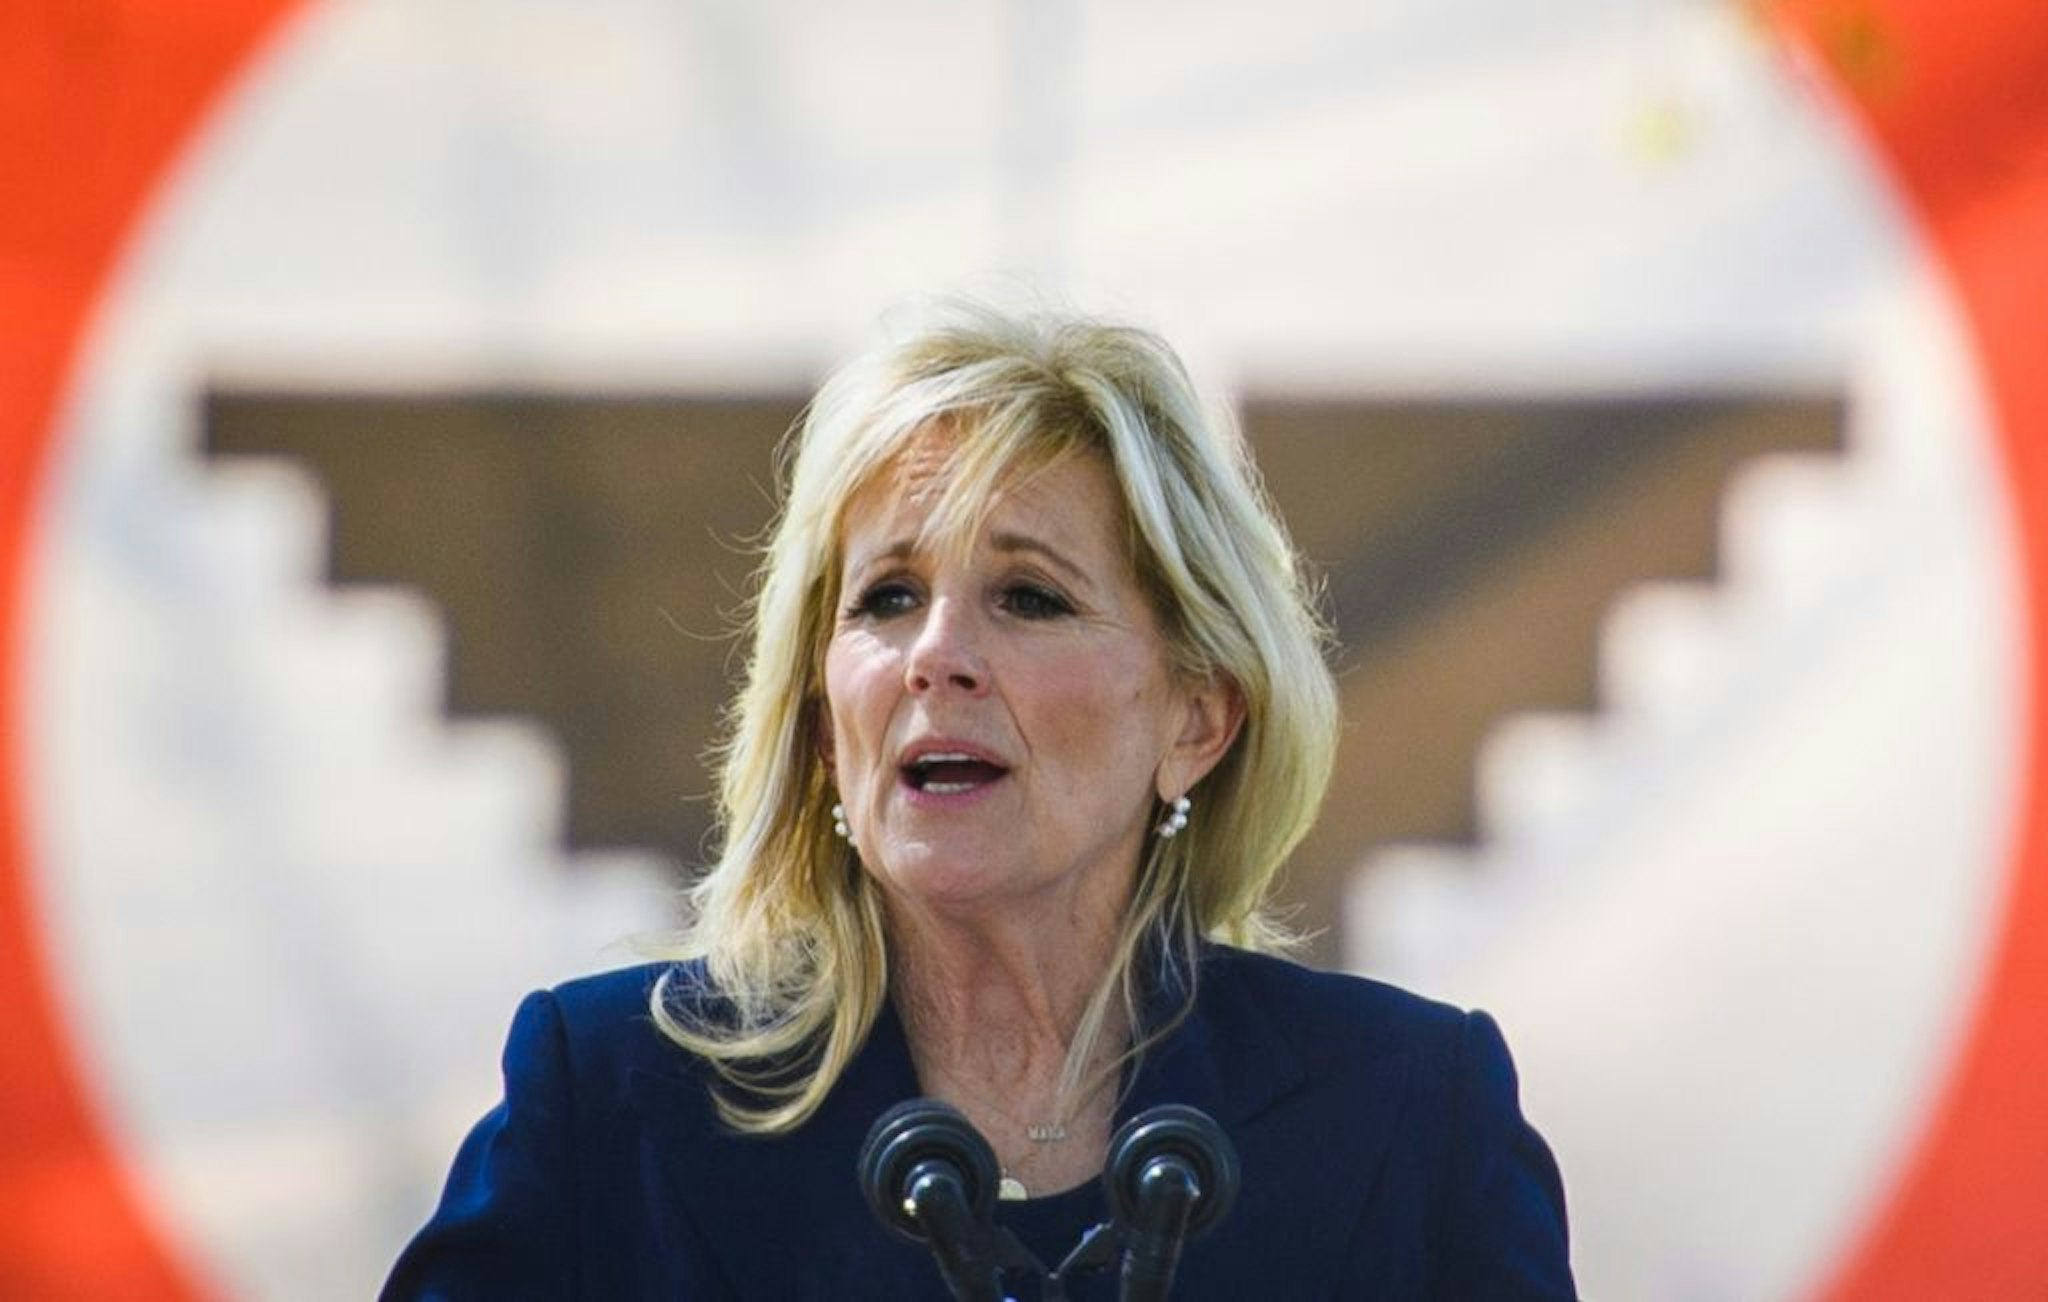 US First Lady Jill Biden speaks during her visit to The Forty Acres, the first headquarters of the United Farm Workers labor union, in Delano, California on March 31, 2021. (Photo by MANDEL NGAN / POOL / AFP) (Photo by MANDEL NGAN/POOL/AFP via Getty Images)